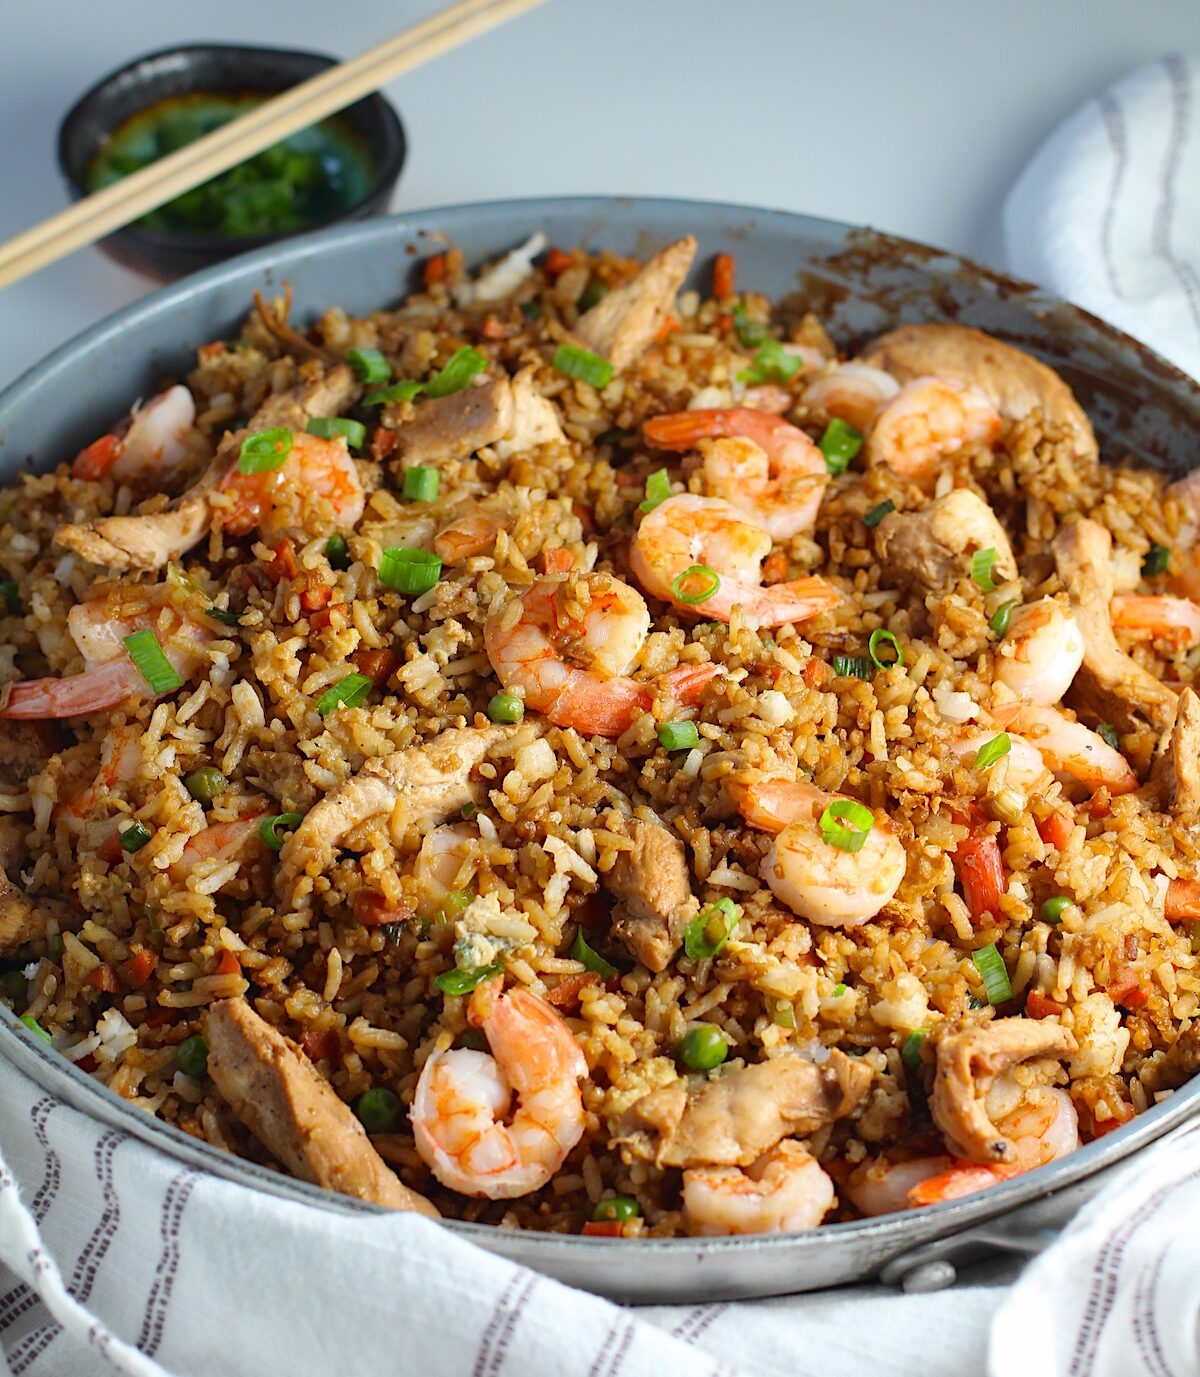 Shrimp and Chicken Fried Rice in a large frying pan on a table with a blue and white towel.  Sliced scallions are sprinkled on top and in a small bowl behine the pan with chopsticks on top.